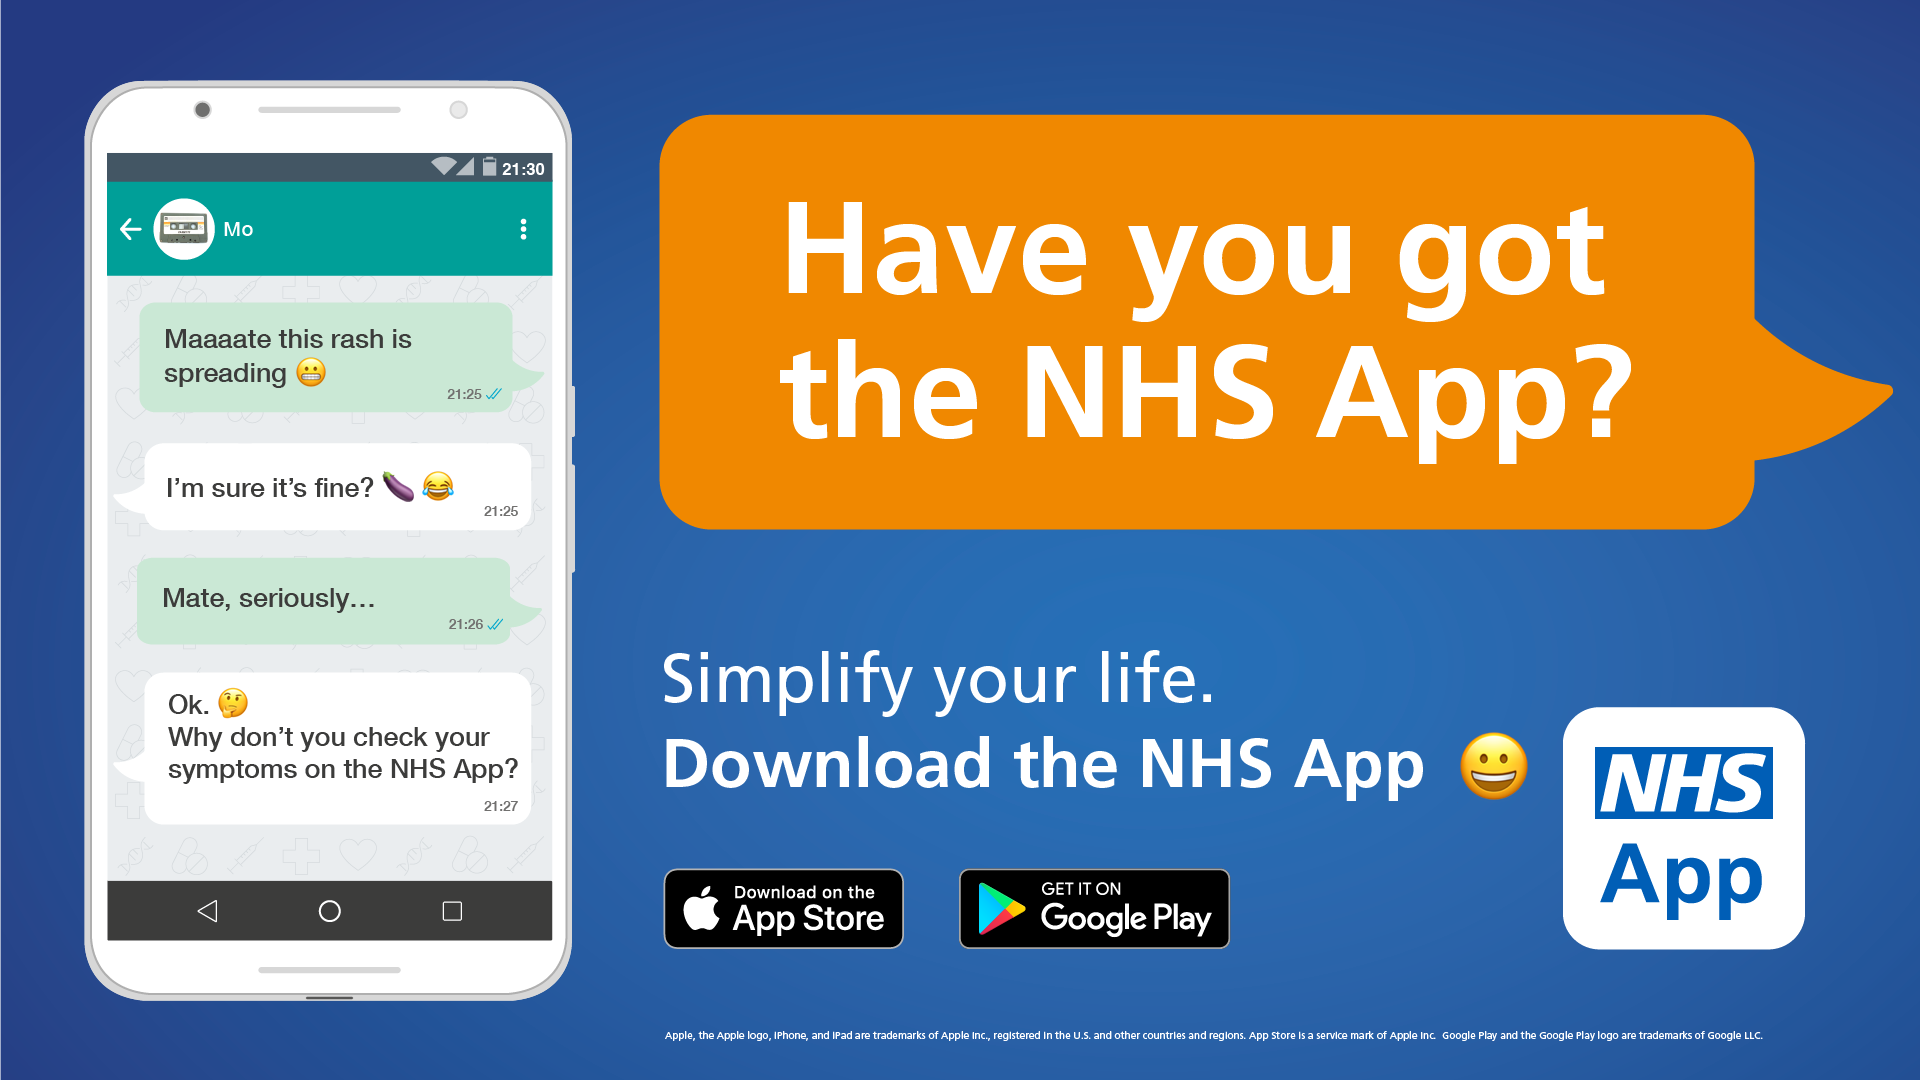 Have you got the NHS App?